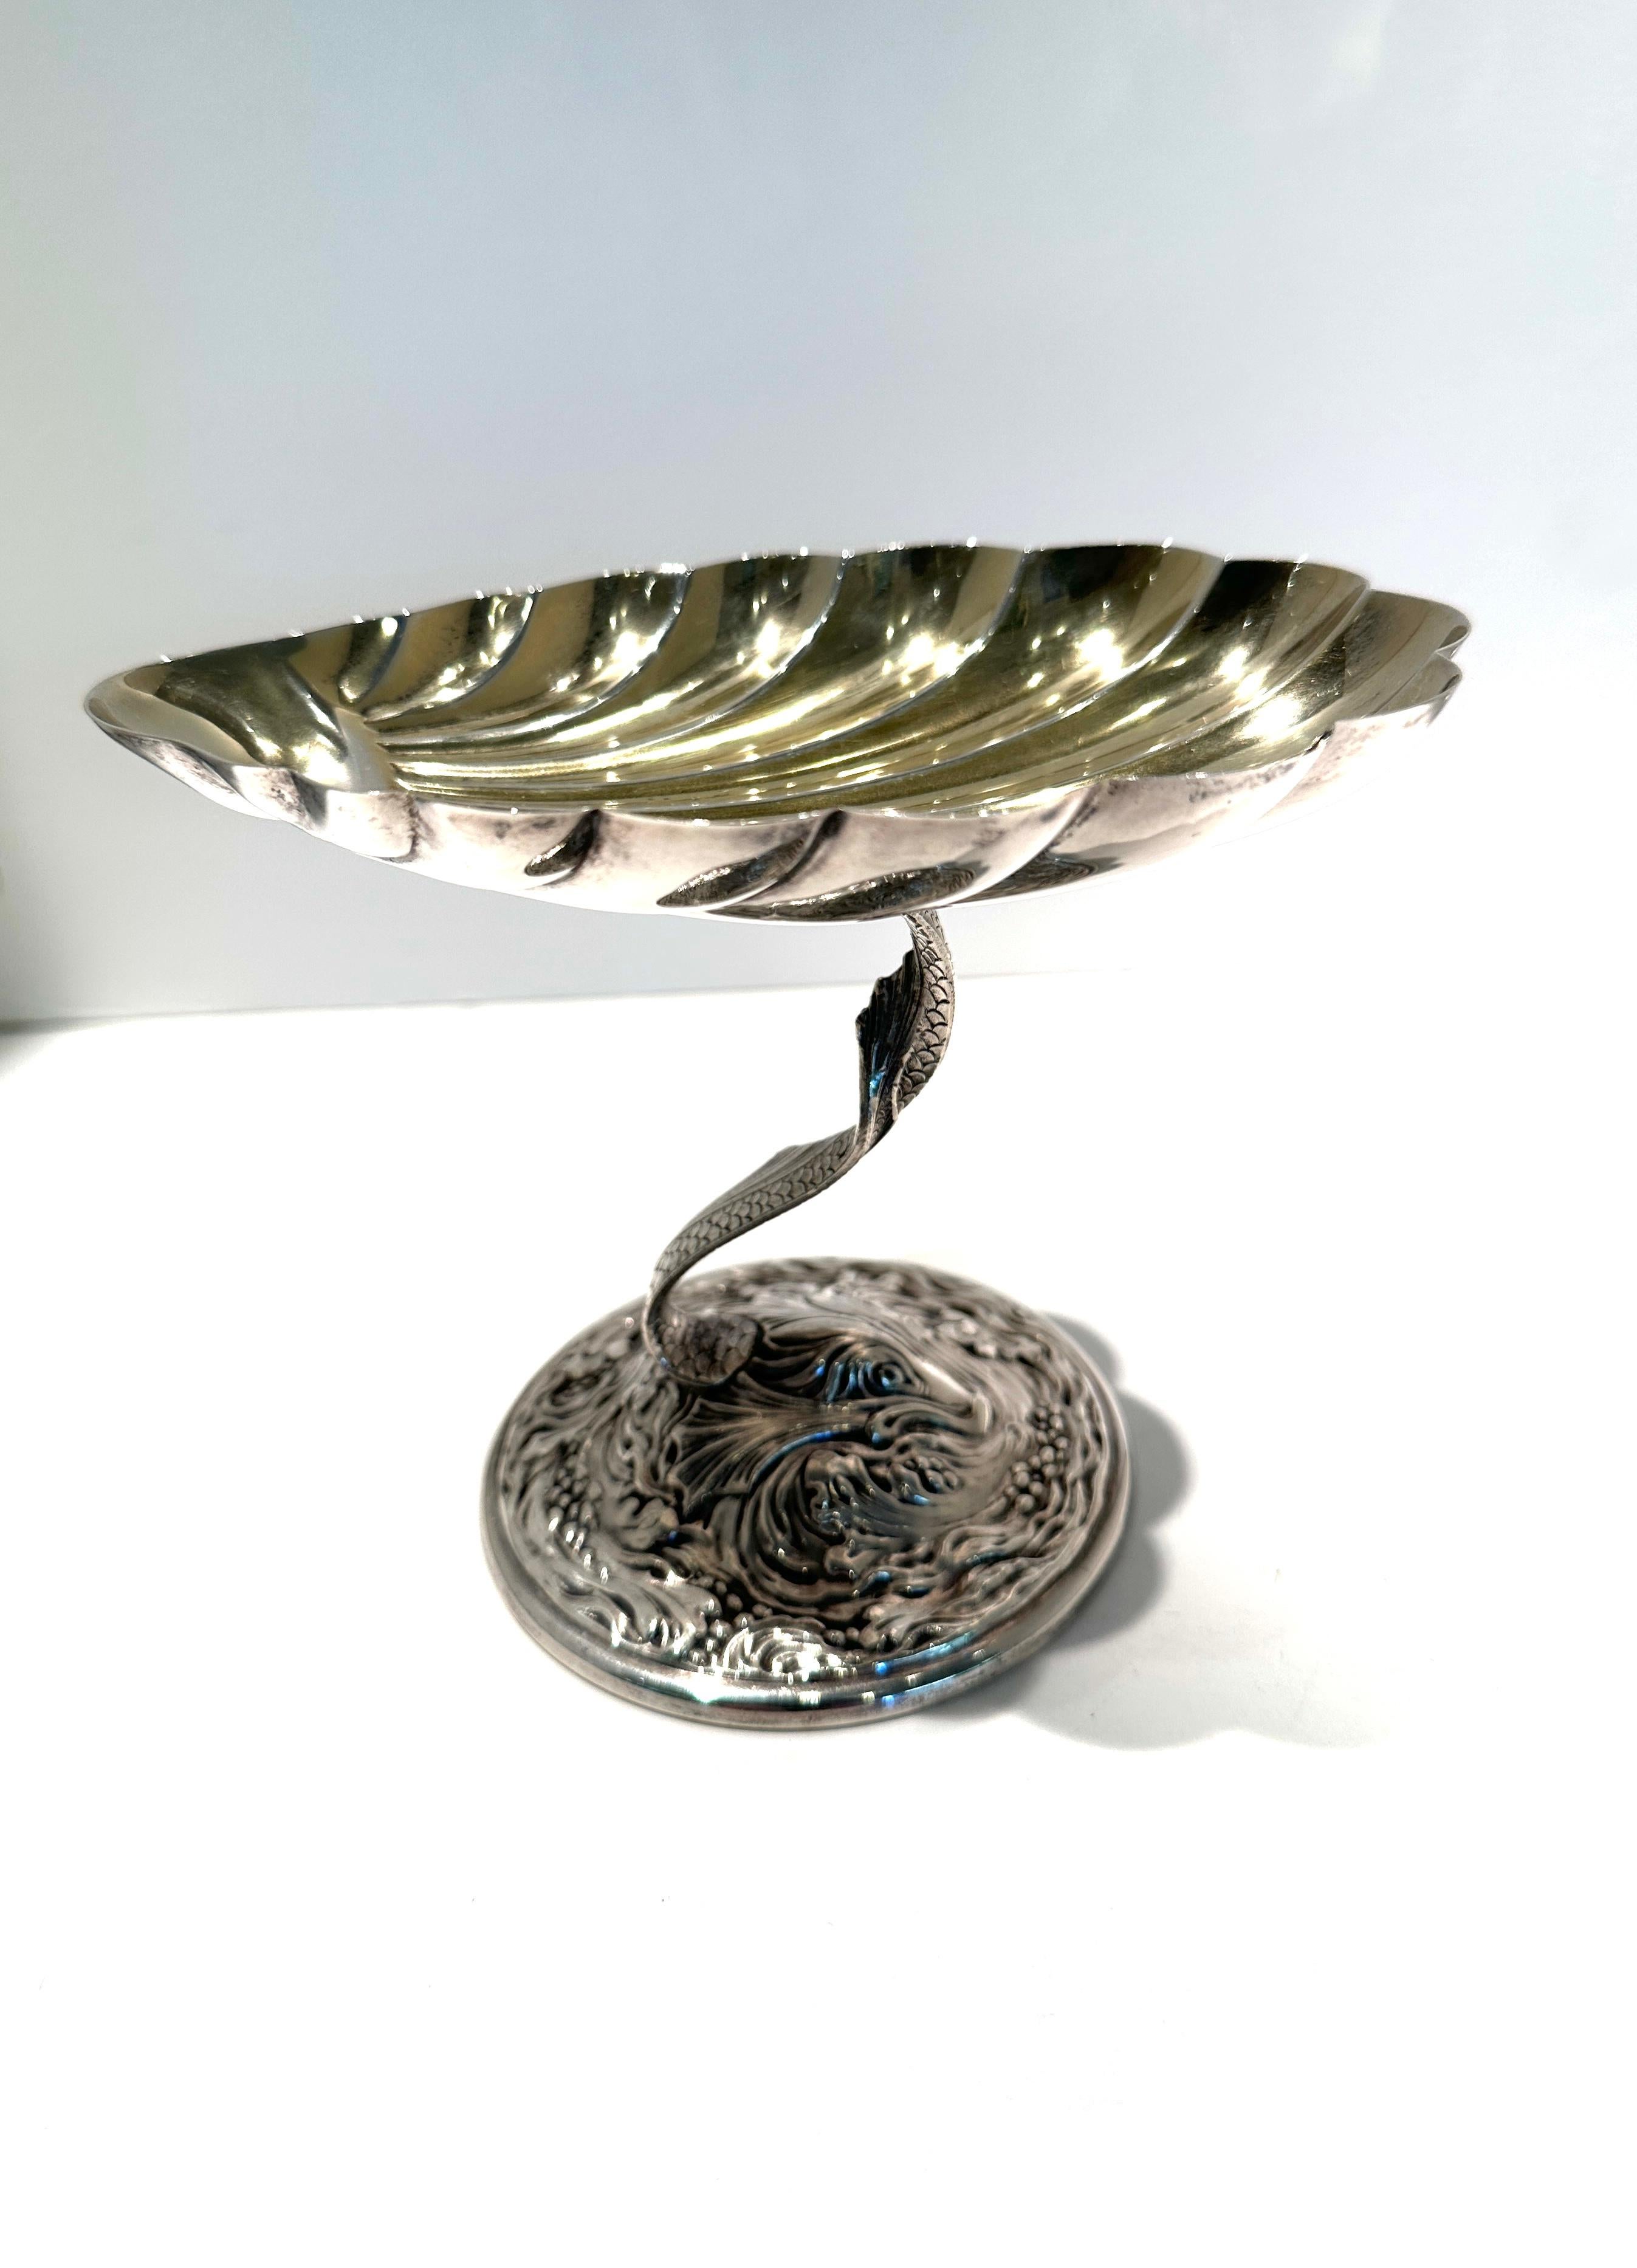 Lovely rare sterling silver dish on stand.  Gold wash shell dish sits on a decorative dolphin base stand.  Rare dish.  made by Gorham in early 1900s.
Excellent condition 